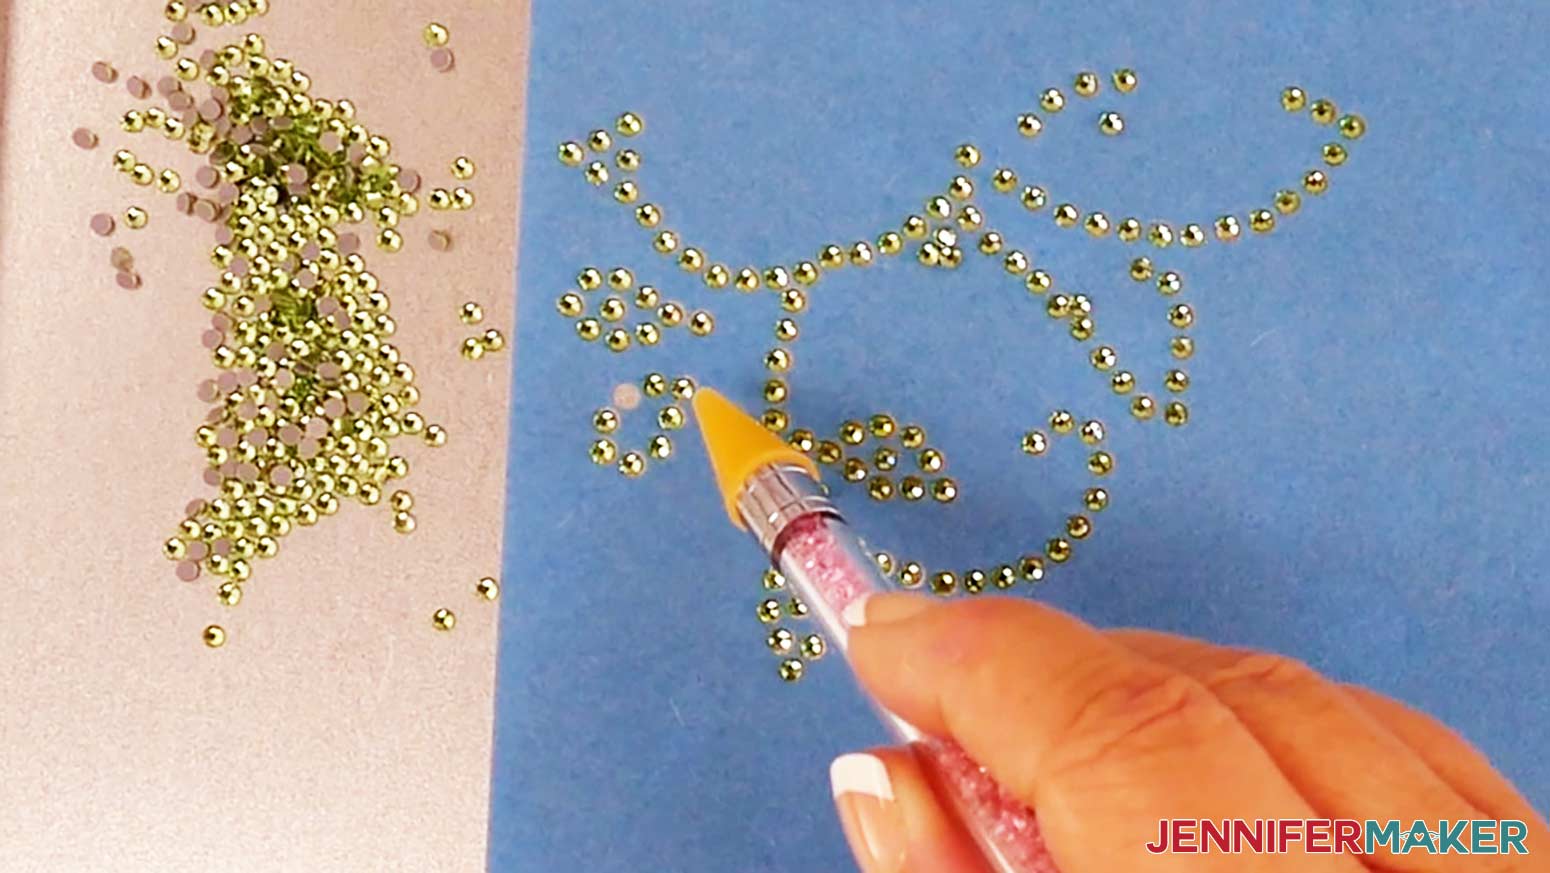 Use a rhinestone picker tool to pick up individual rhinestones to fill in empty holes.